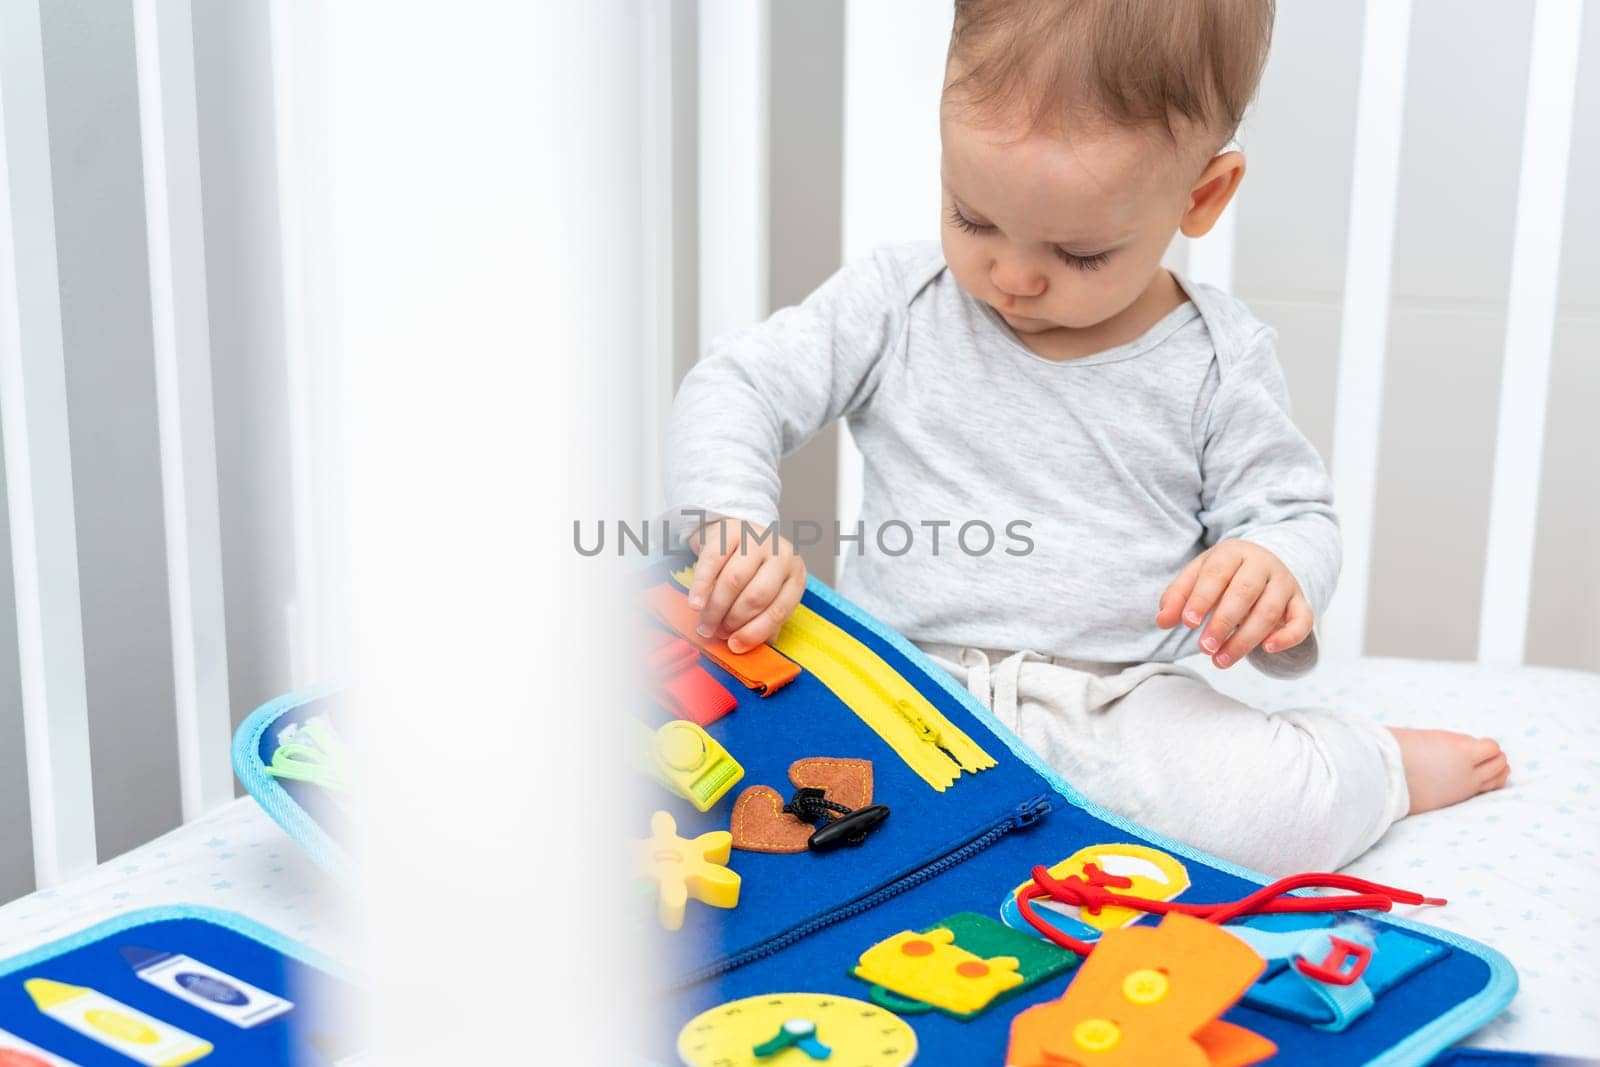 Baby playing with busy book sitting in crib. Concept of smart books and modern toys by Mariakray